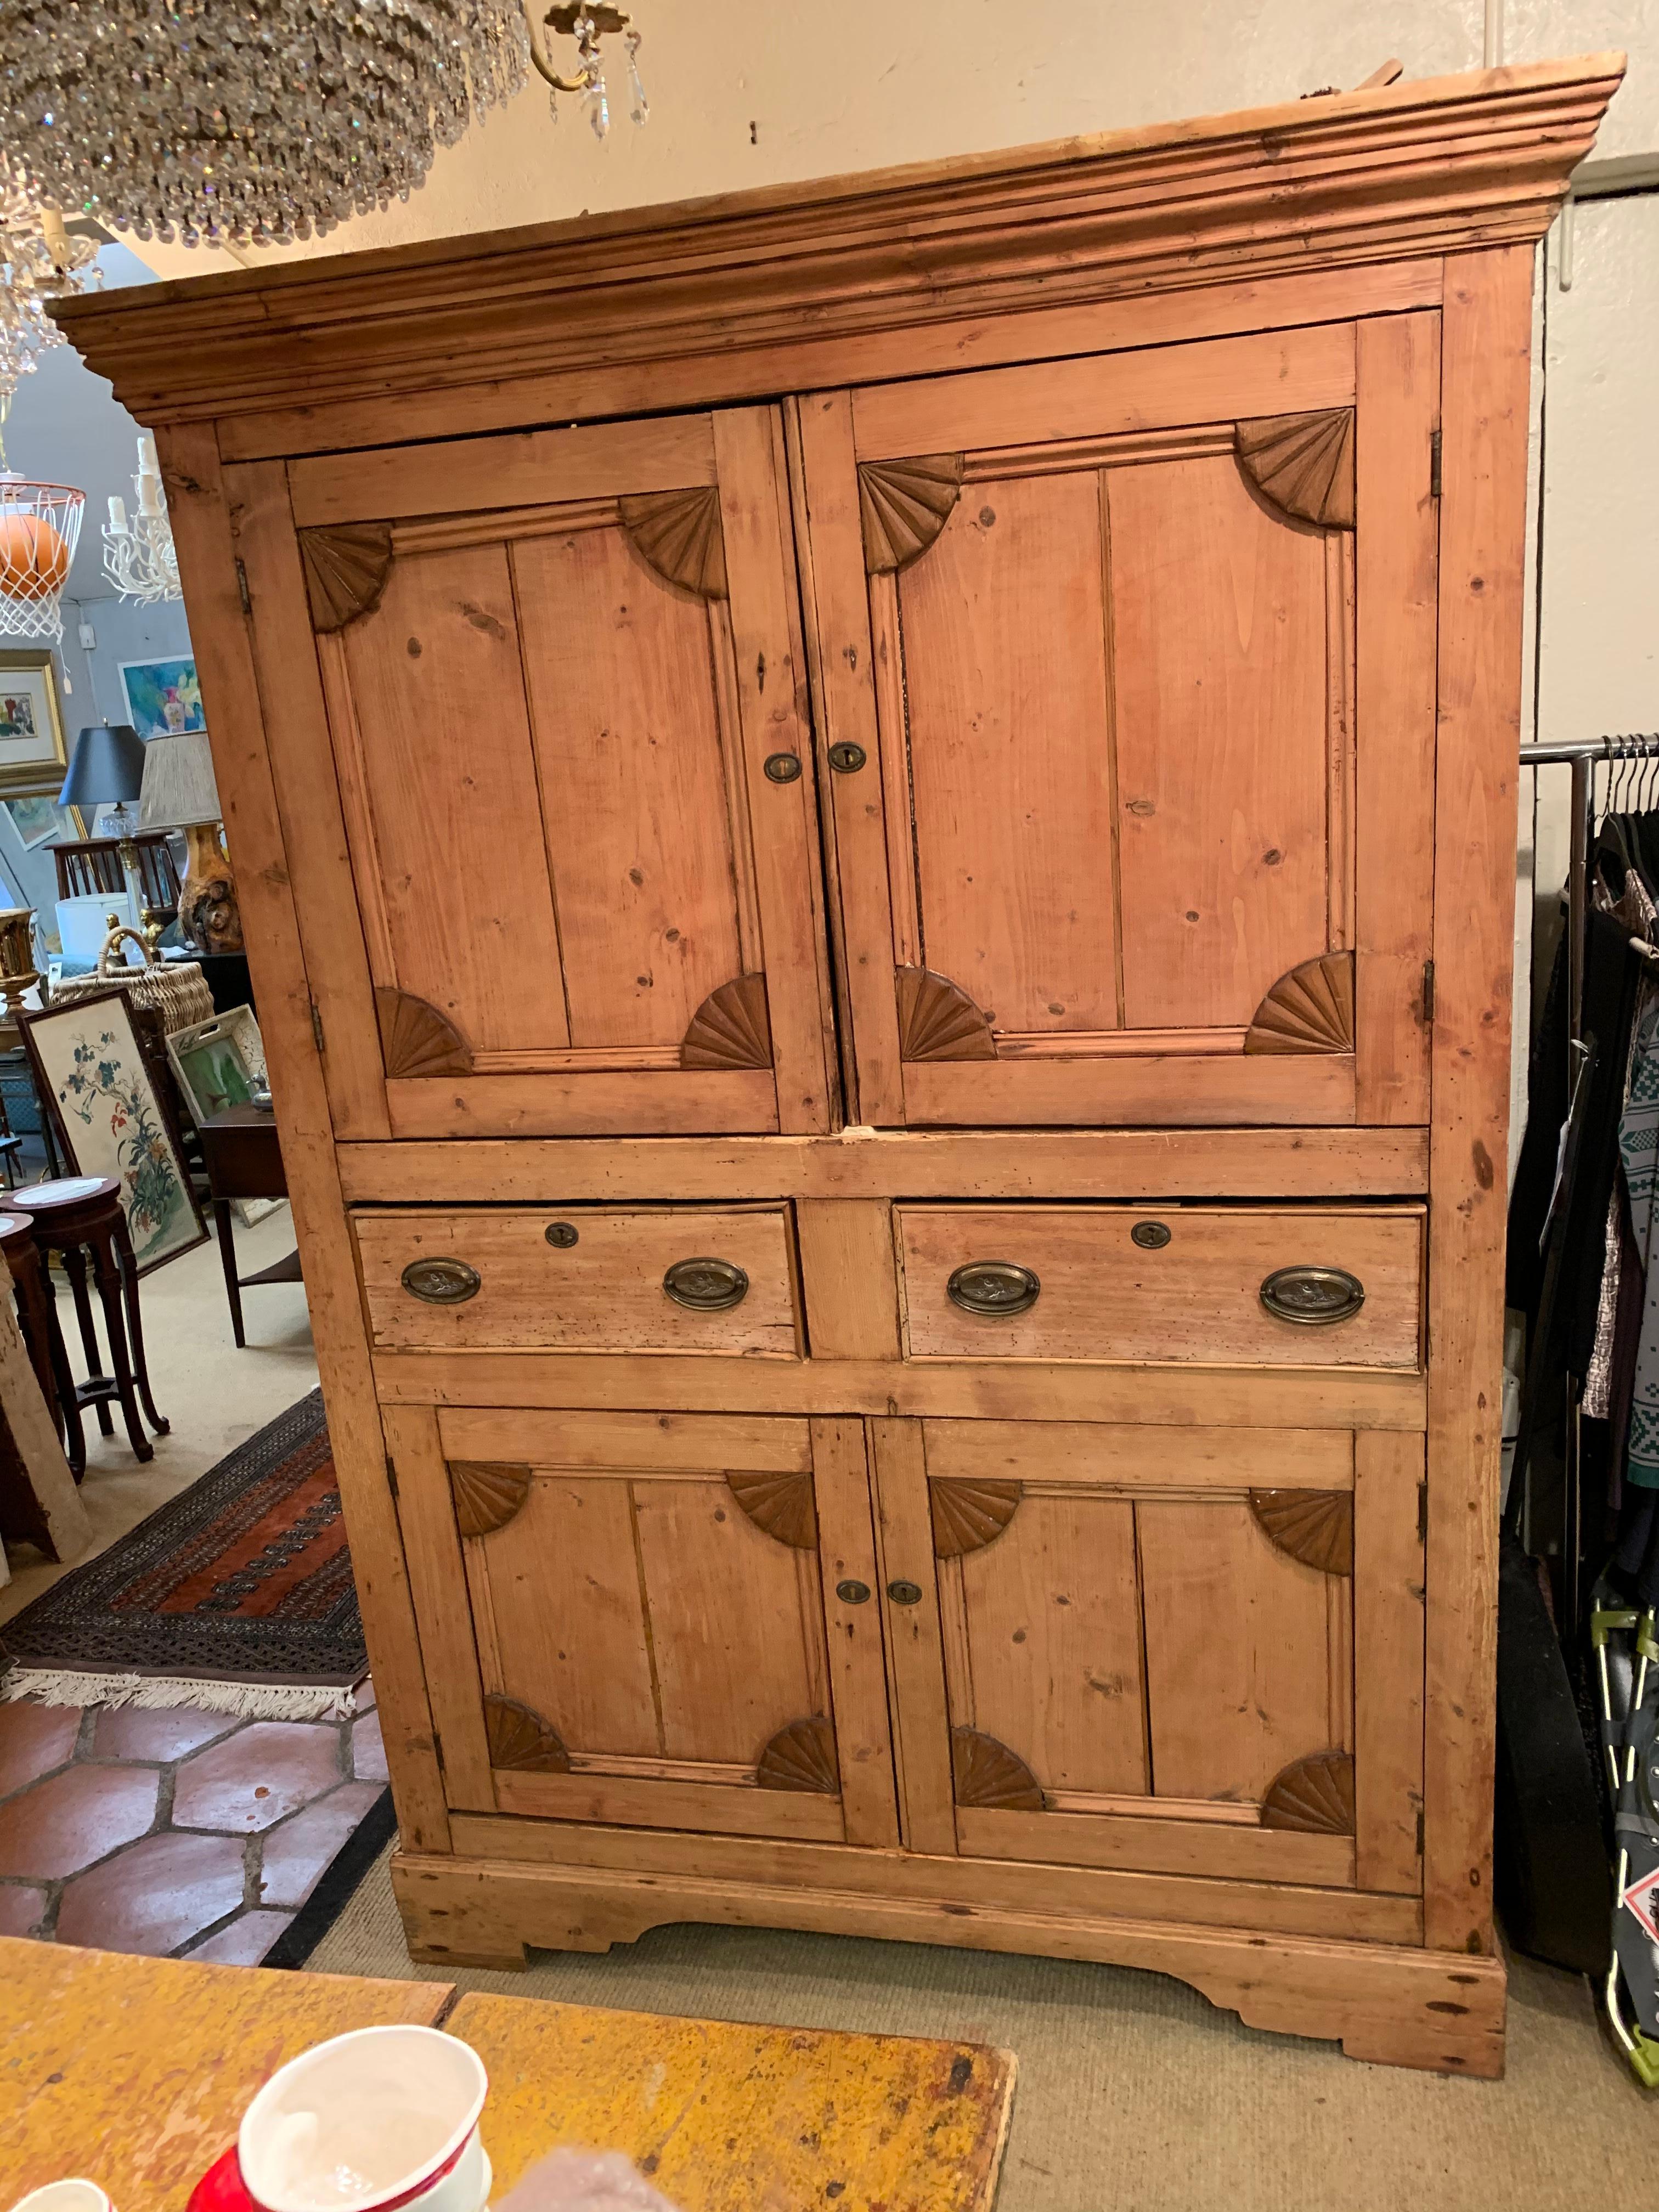 A very large natural rustic Irish pine cabinet hutch with paneled doors top and bottom separated by two drawers. Tons of storage and Americana charm.
Measures: Body is 51 W, 24 D
Shelf in top is 17